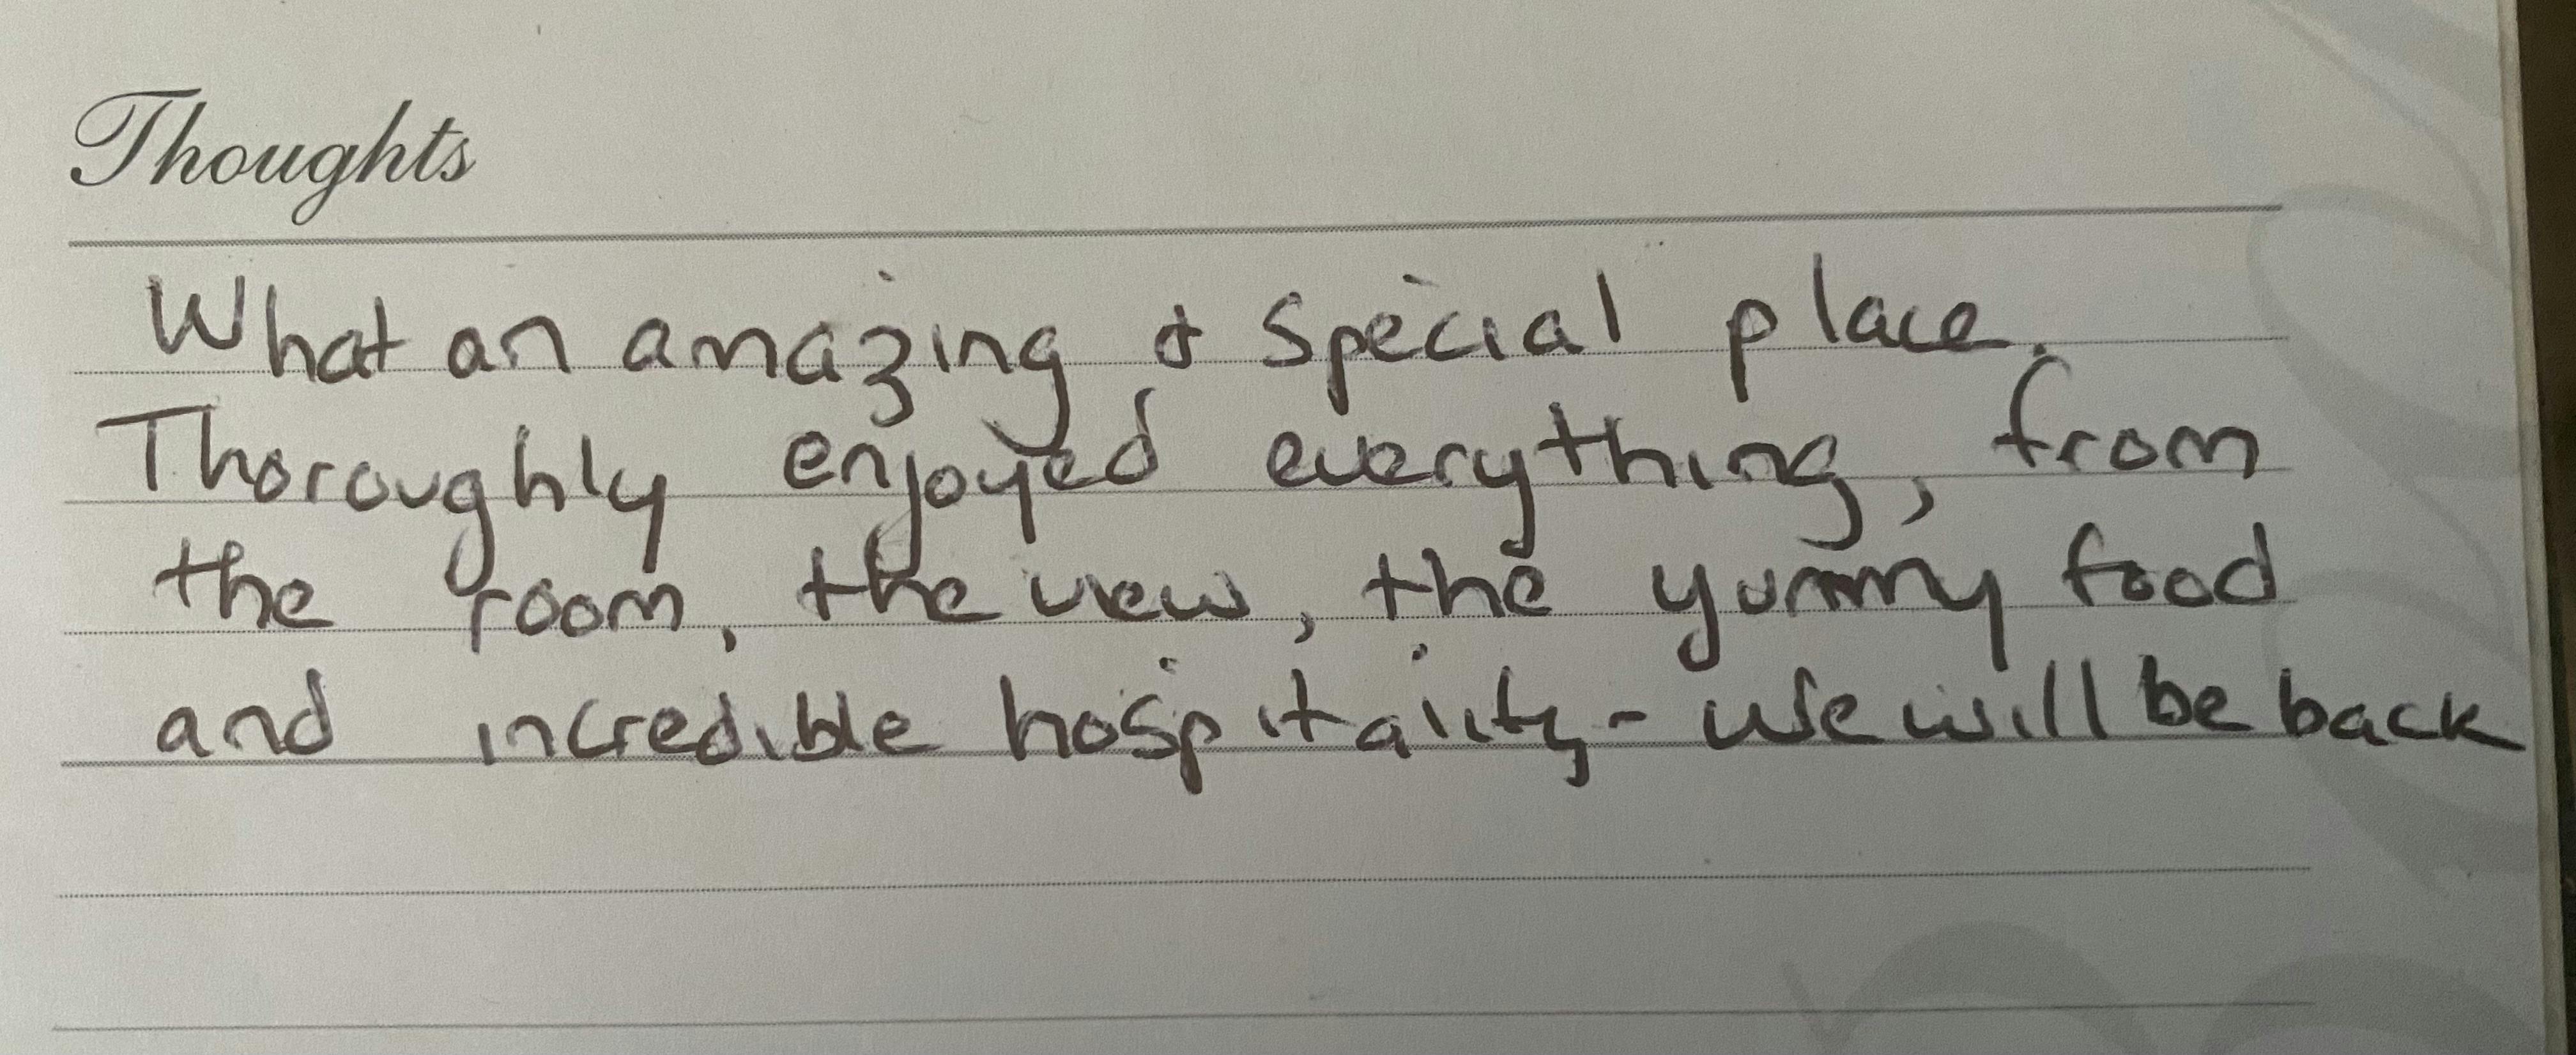 We are so fortunate to have the most amazing reviews from our incredible guests with many guests rating us 6 Stars